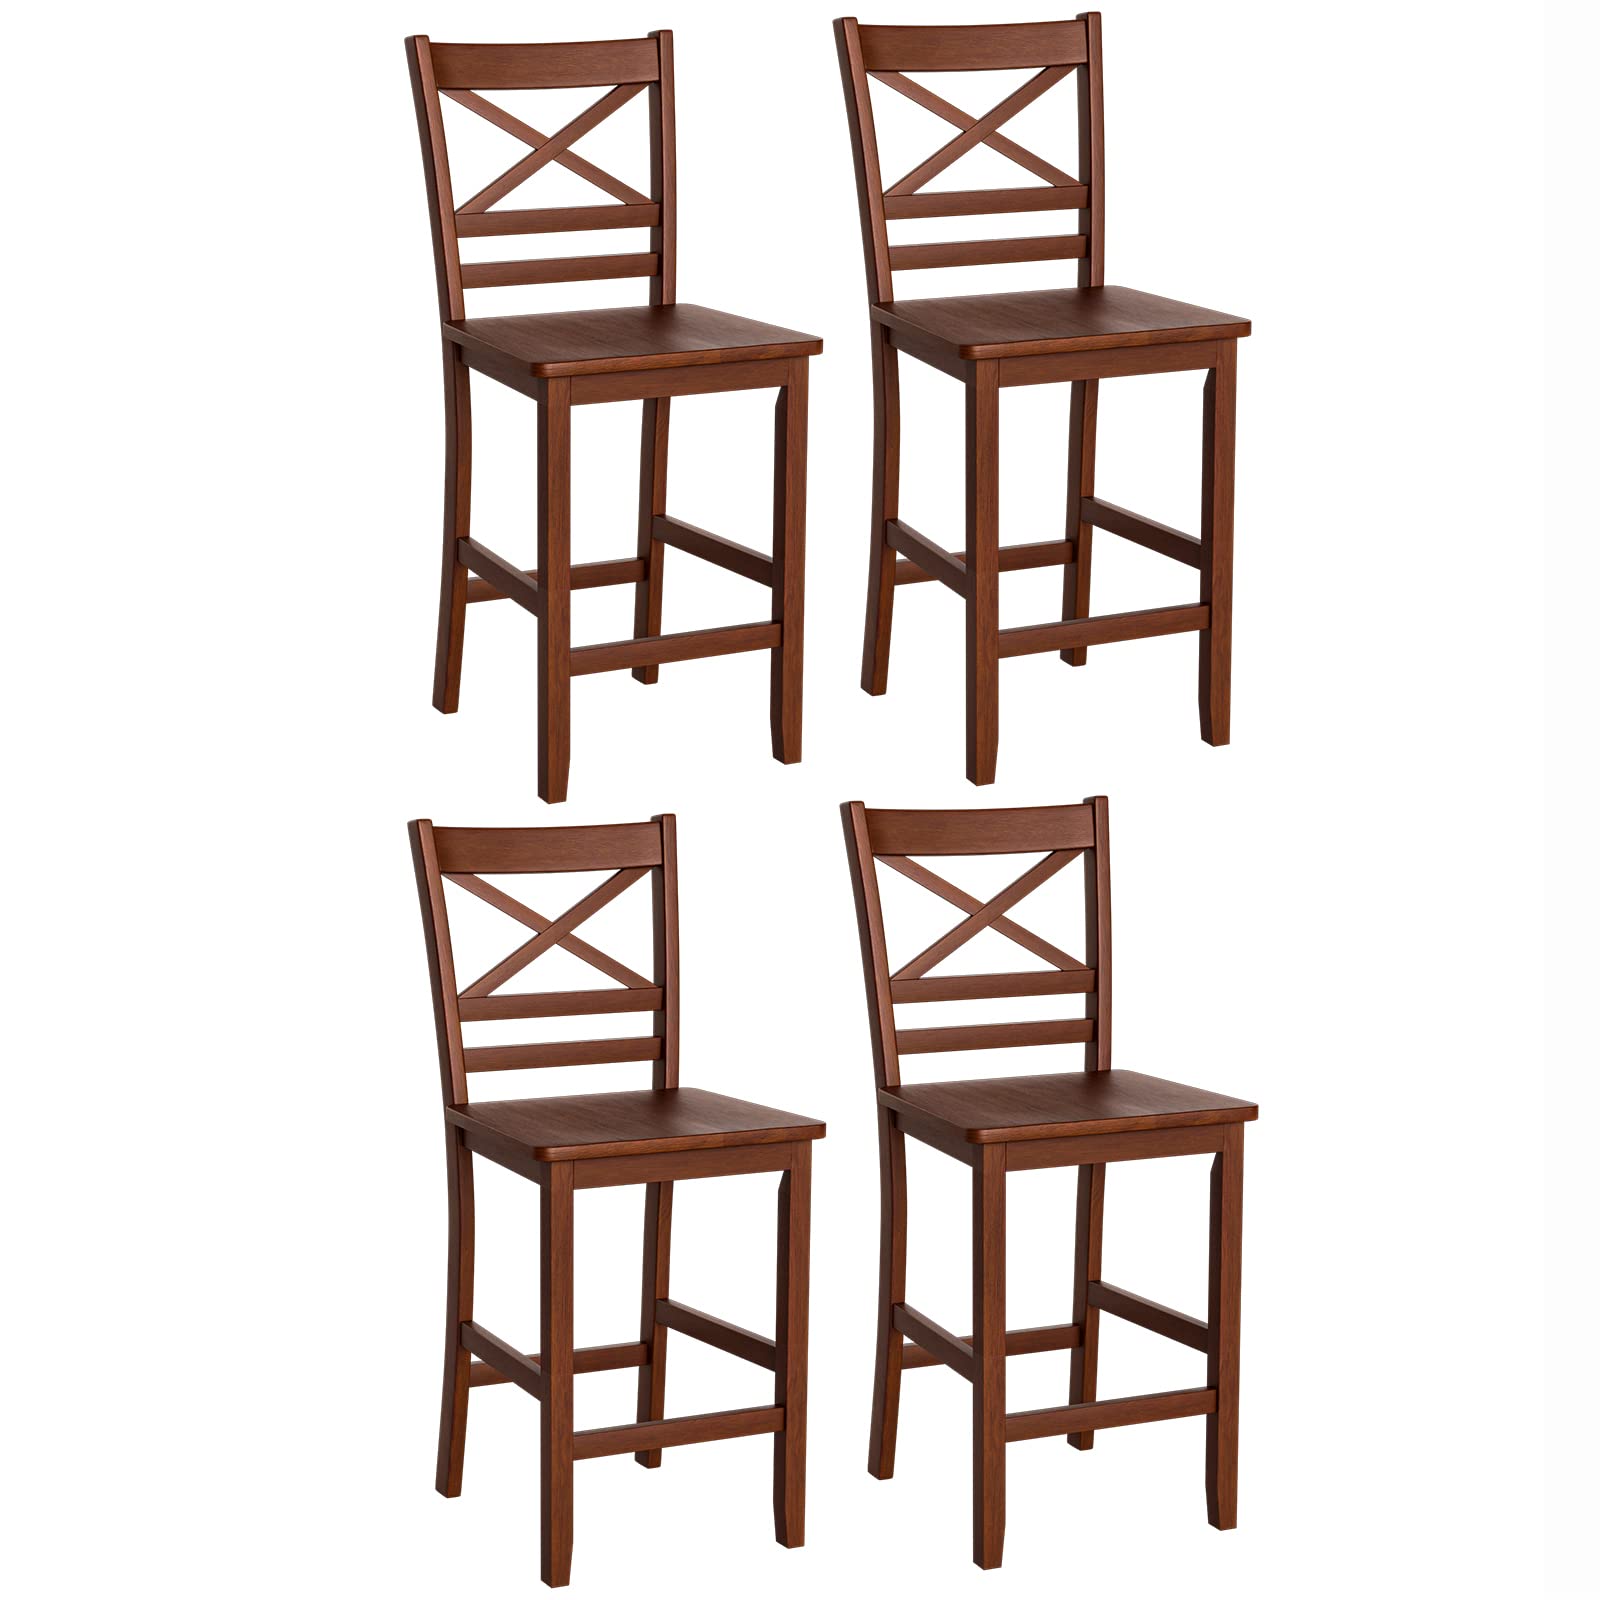 Giantex 25'' Antique Kitchen Counter Height Chairs with Wooden X-Shaped Backrest & Rubber Wood Legs